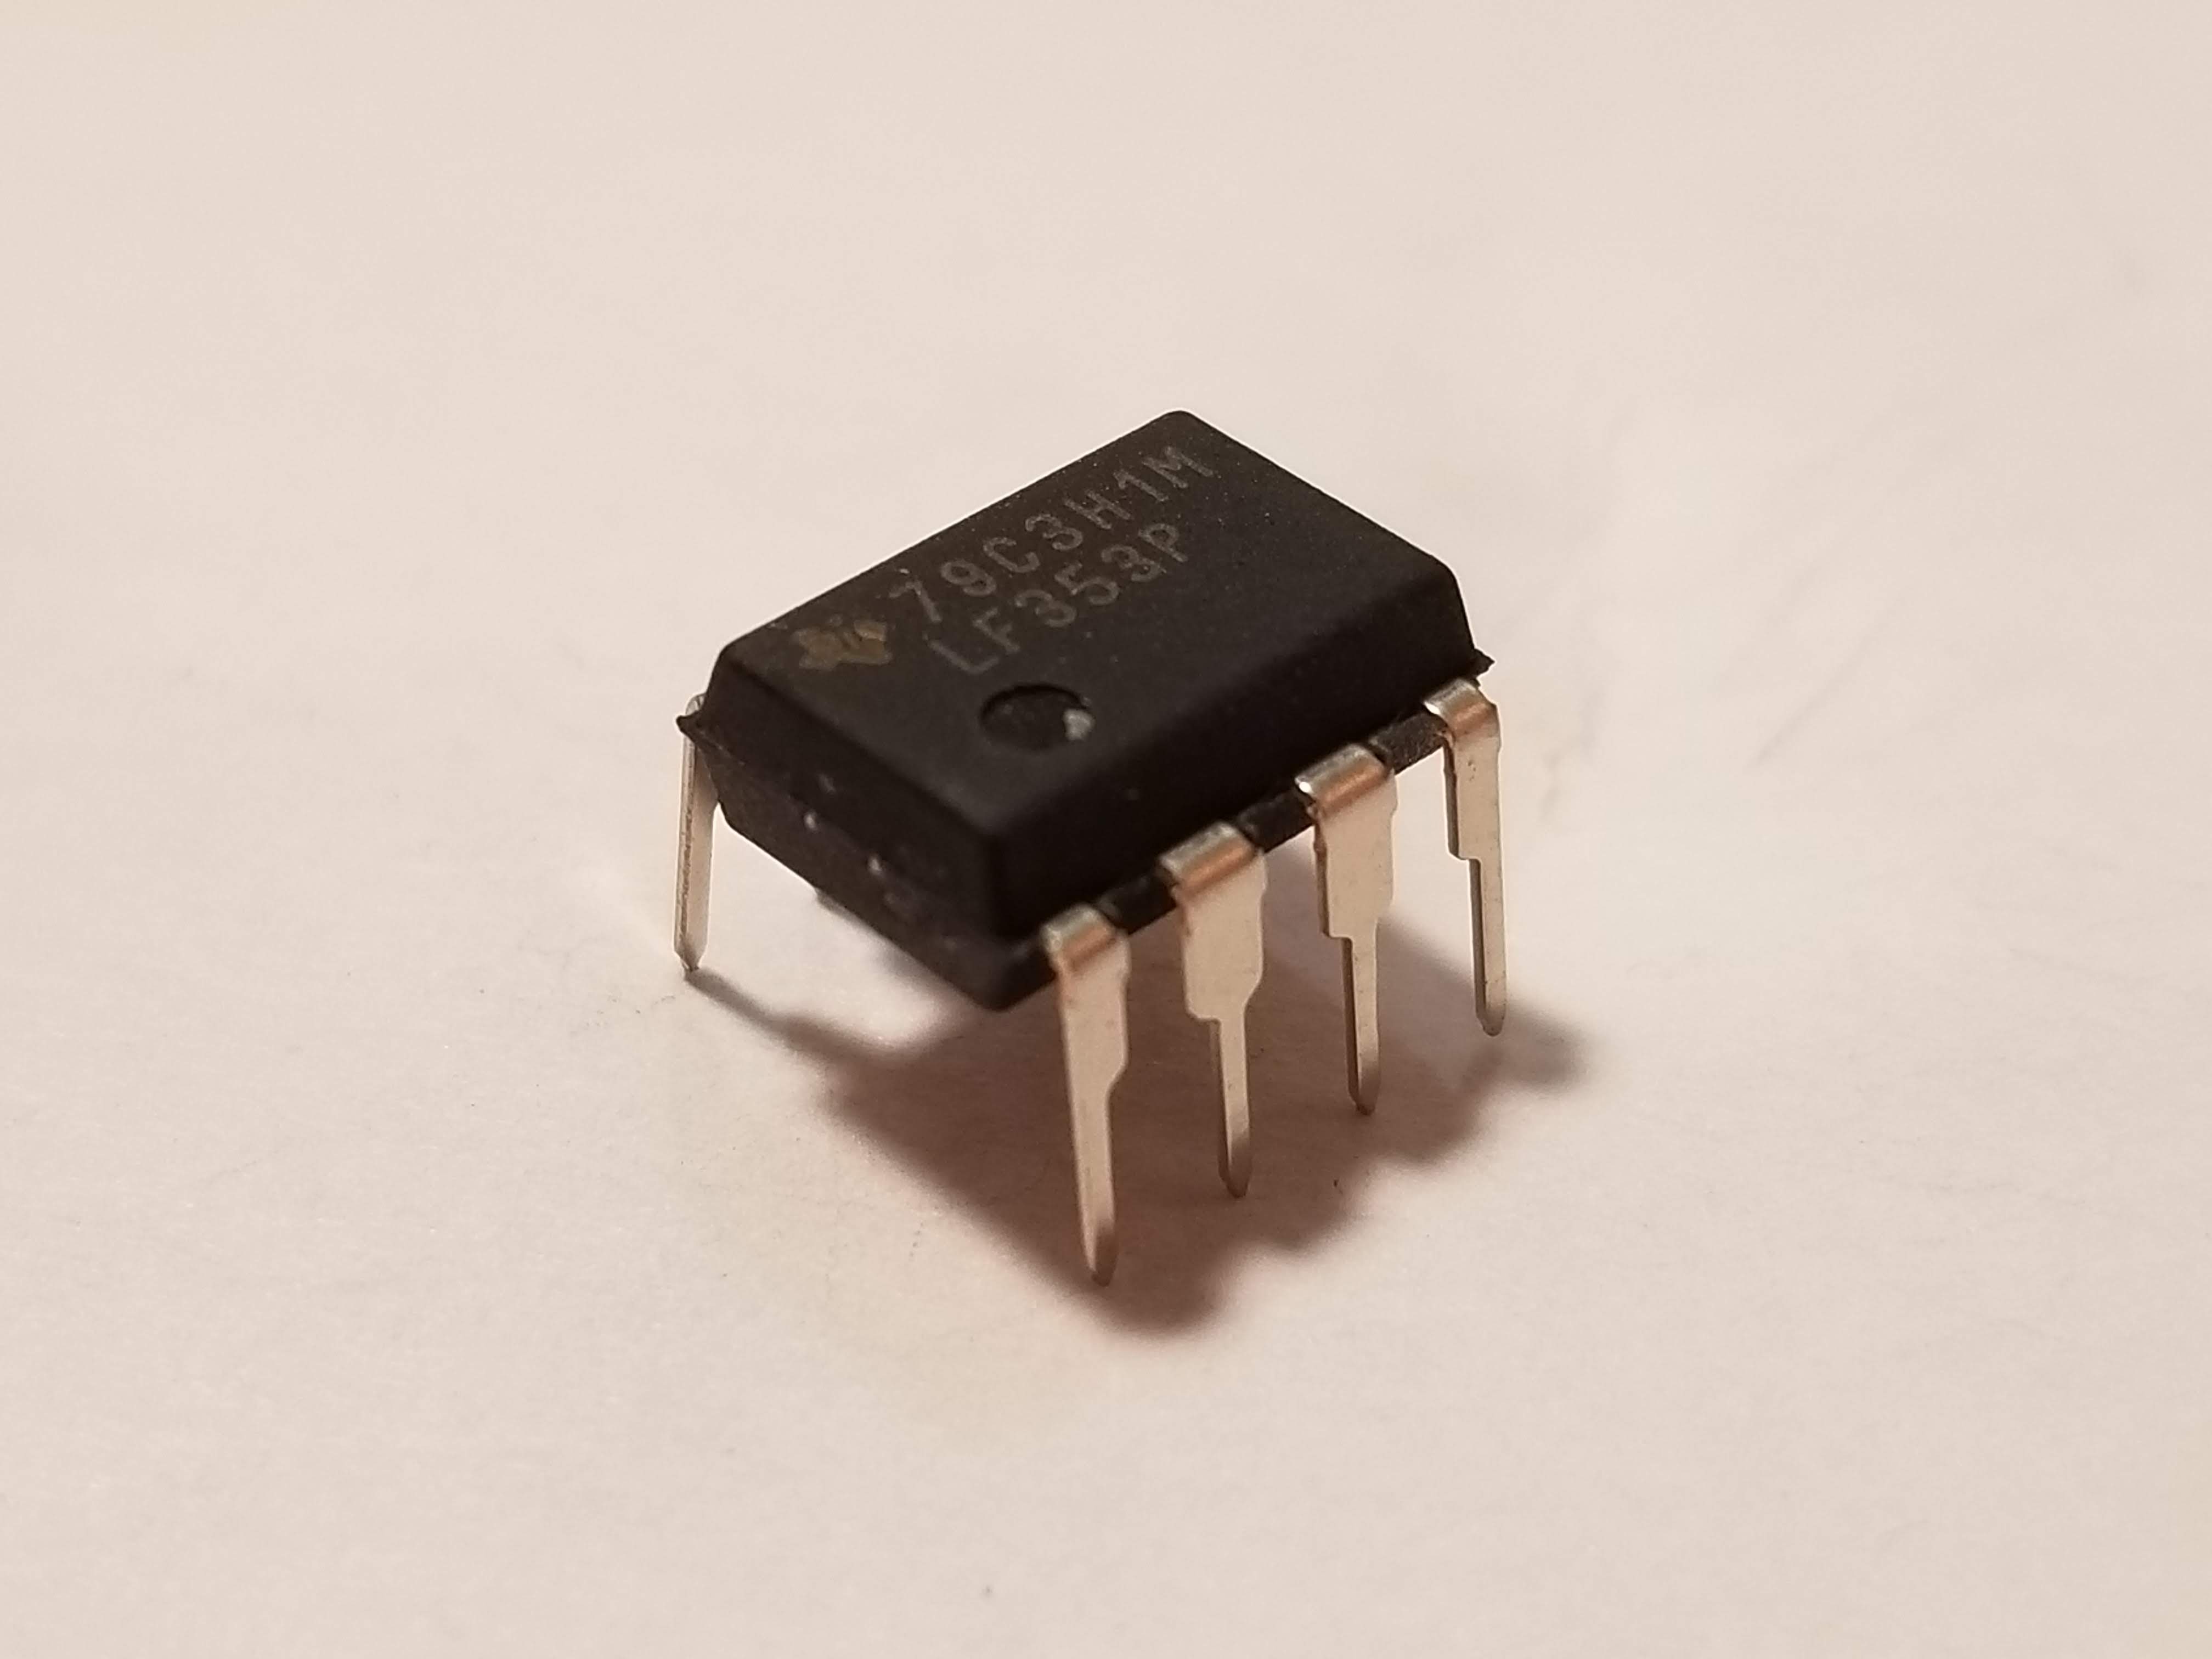 Picture of LF353 Dual Op-Amp